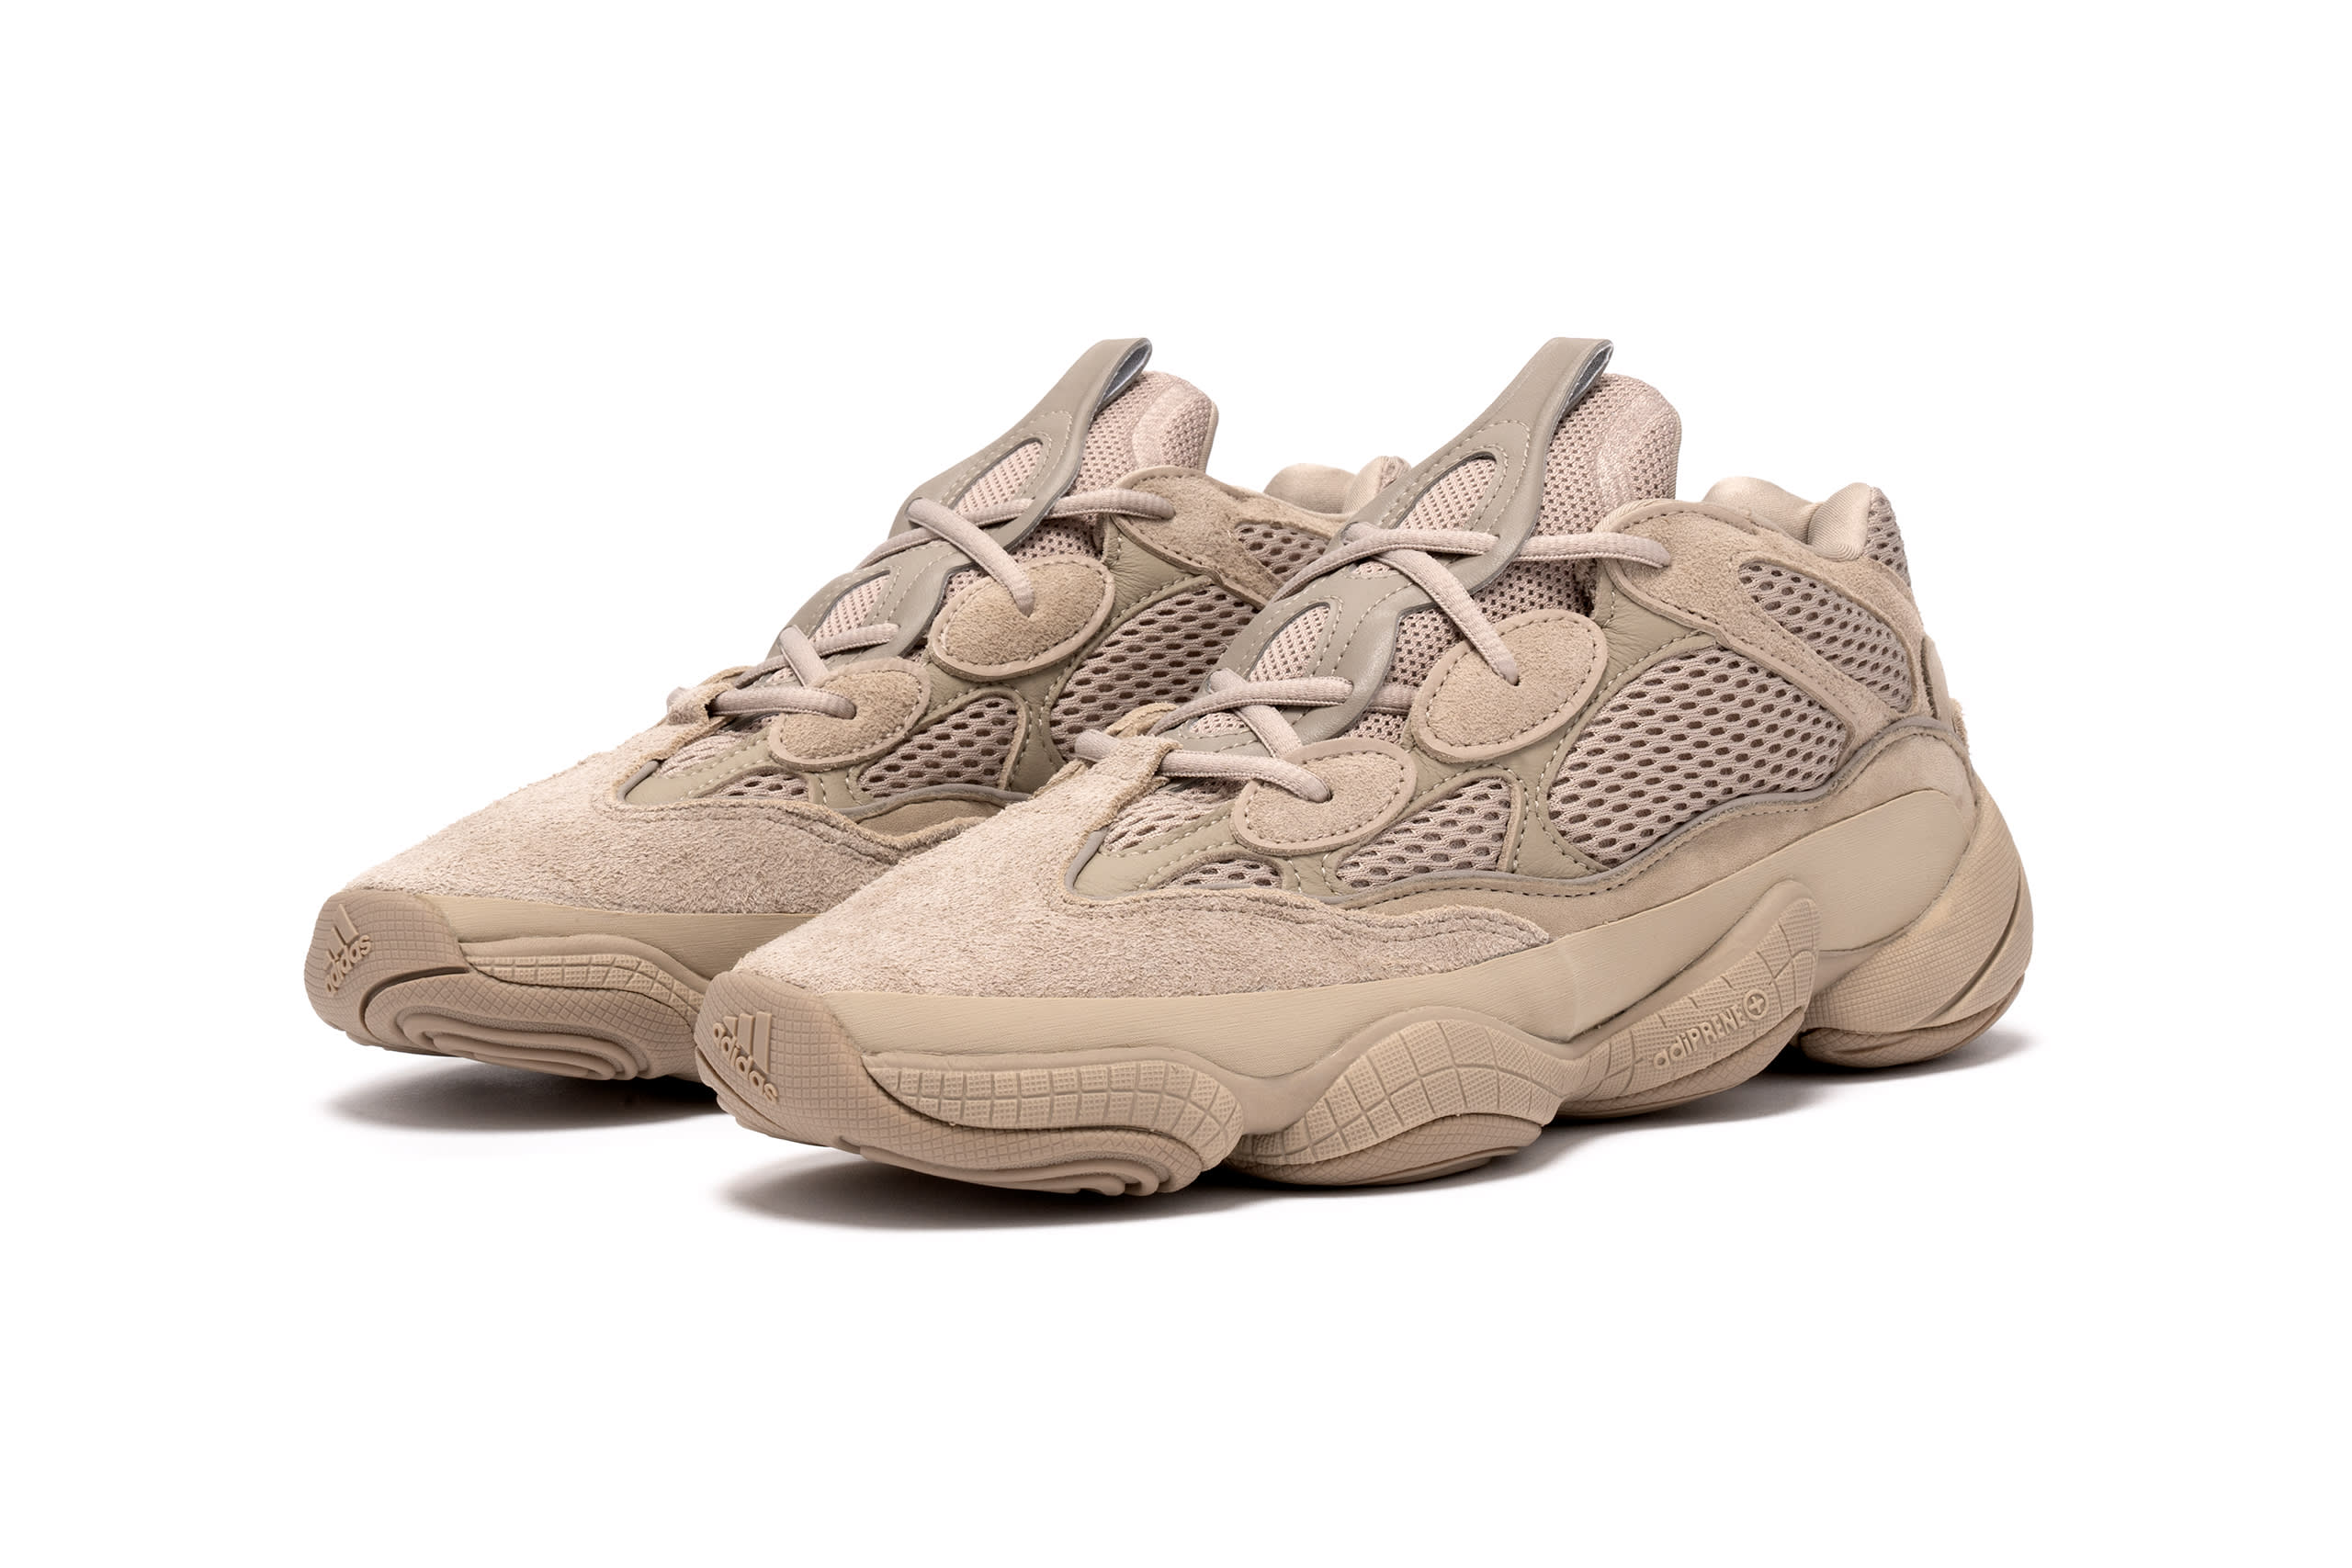 adidas YEEZY 500 “Taupe Light” | Release Date: 06.05.21 | HAVEN